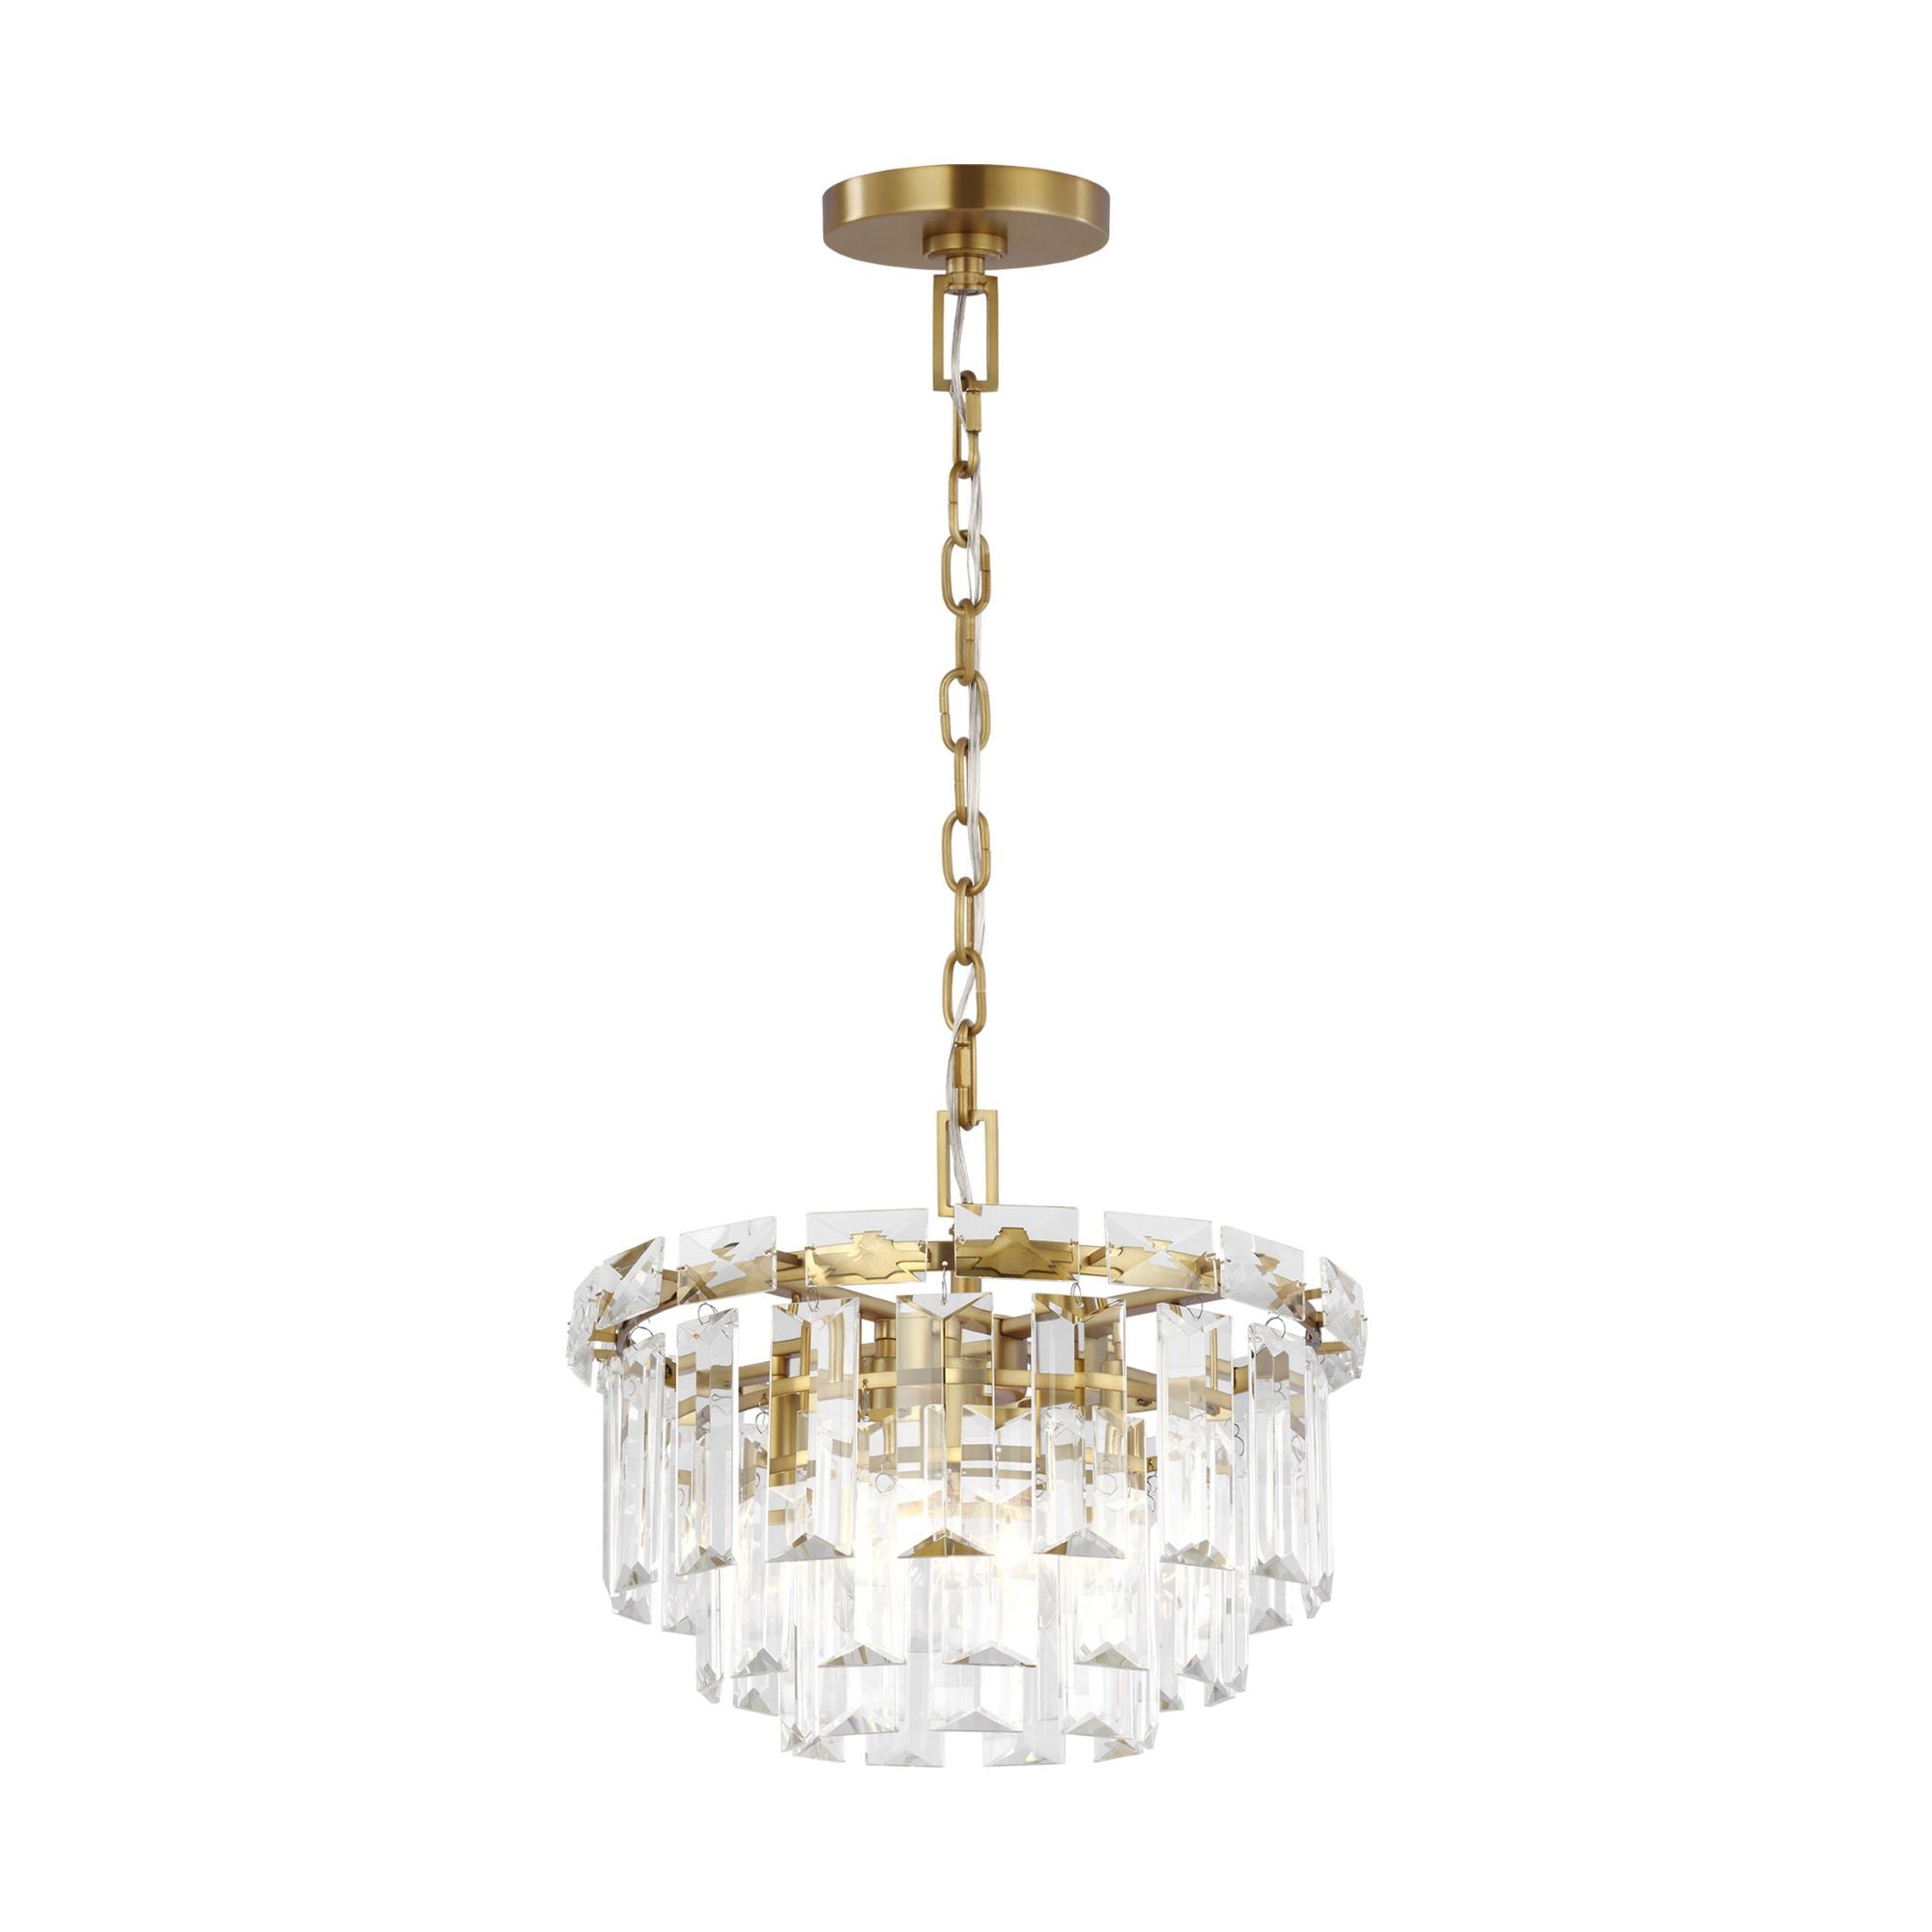 Chapman & Myers Arden Small Chandelier in Burnished Brass